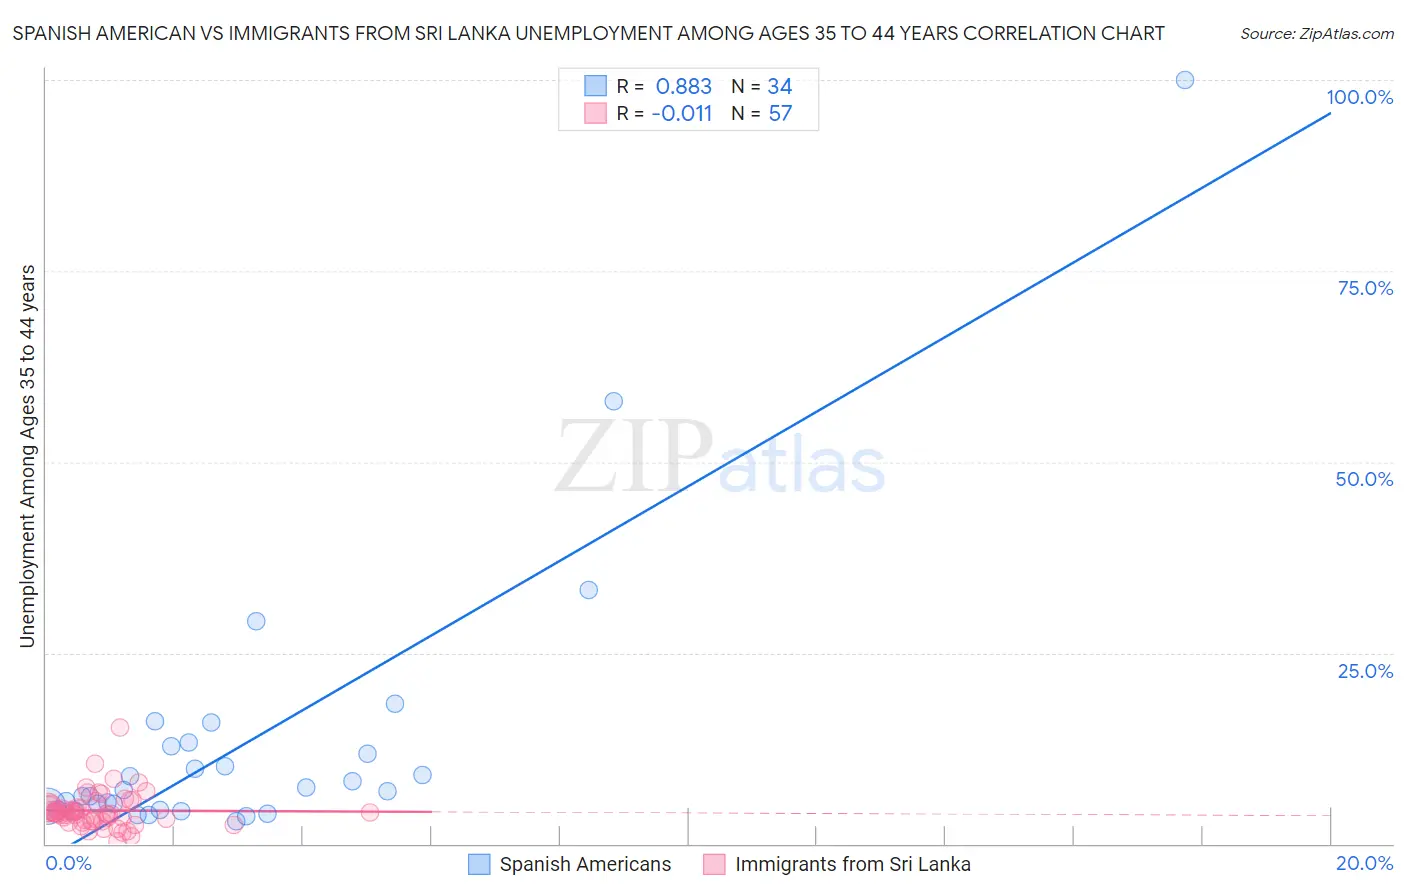 Spanish American vs Immigrants from Sri Lanka Unemployment Among Ages 35 to 44 years